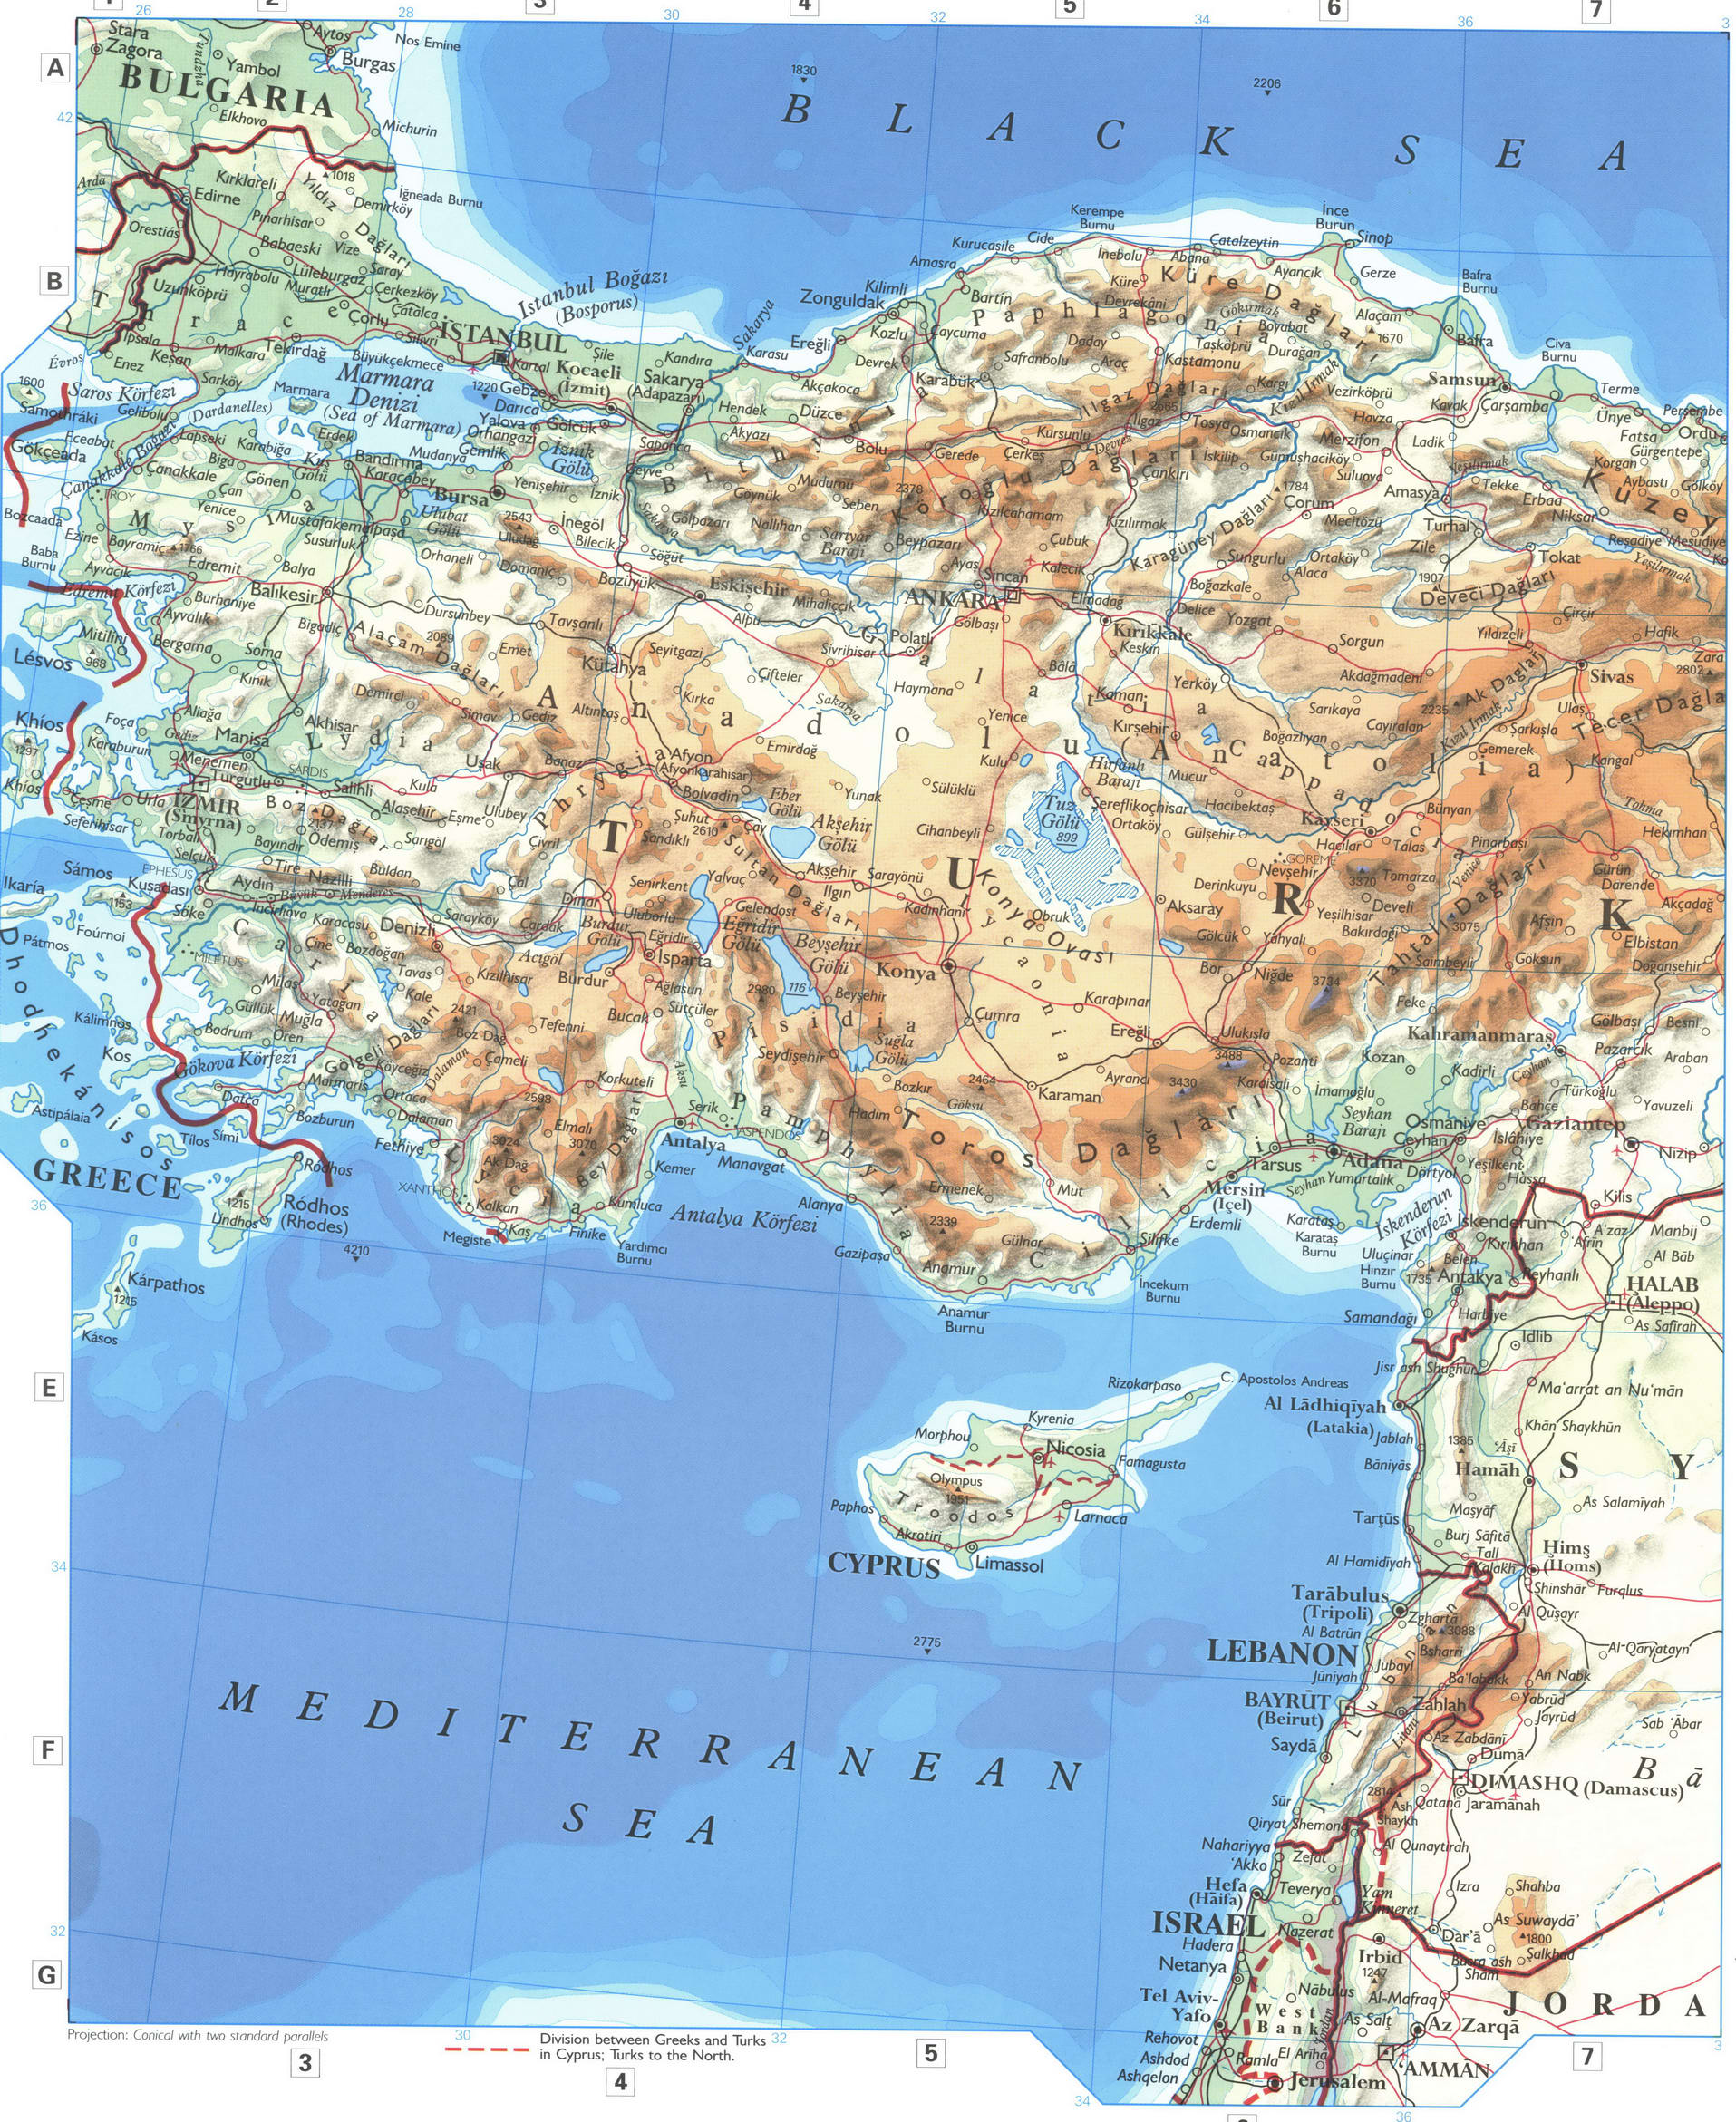 Turkey and Syria map